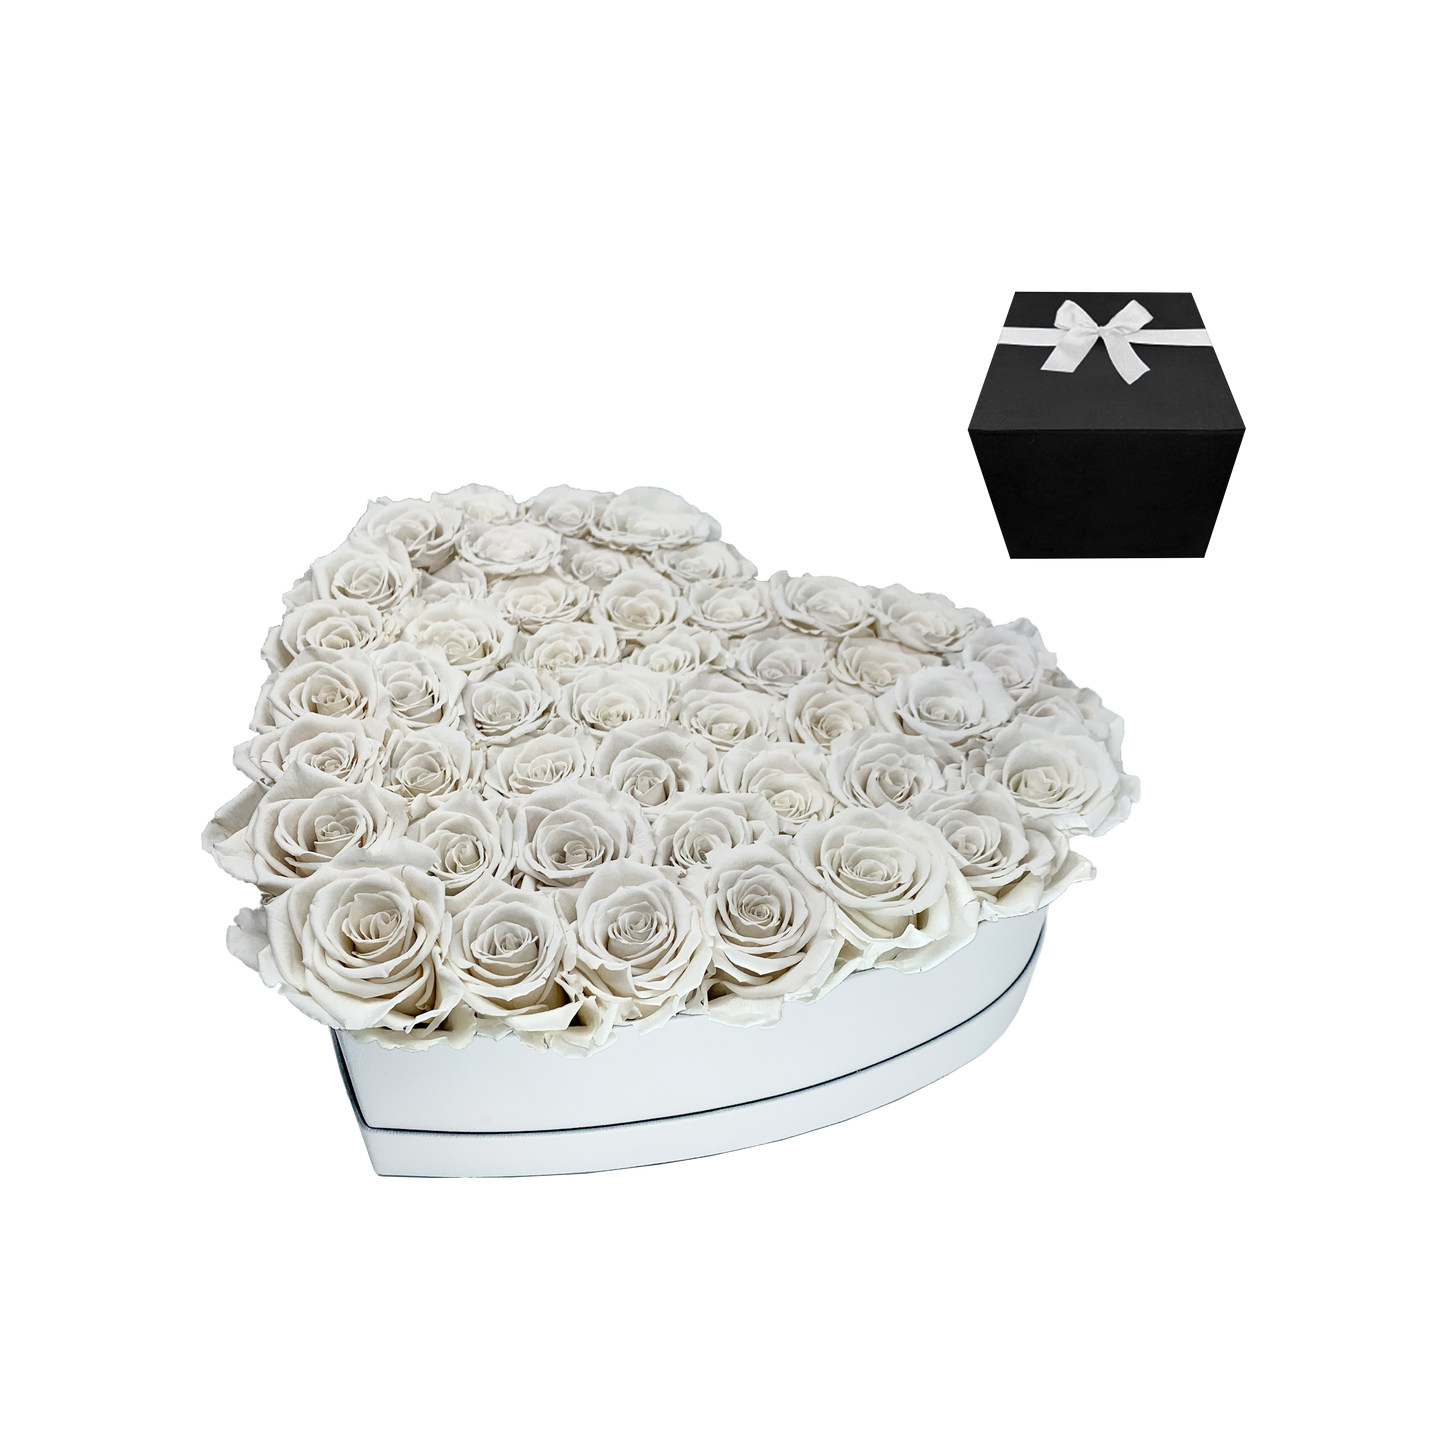 LUXURY 44-46 PRESERVED ROSES ARRANGEMENT - HEART PU LEATHER BOX